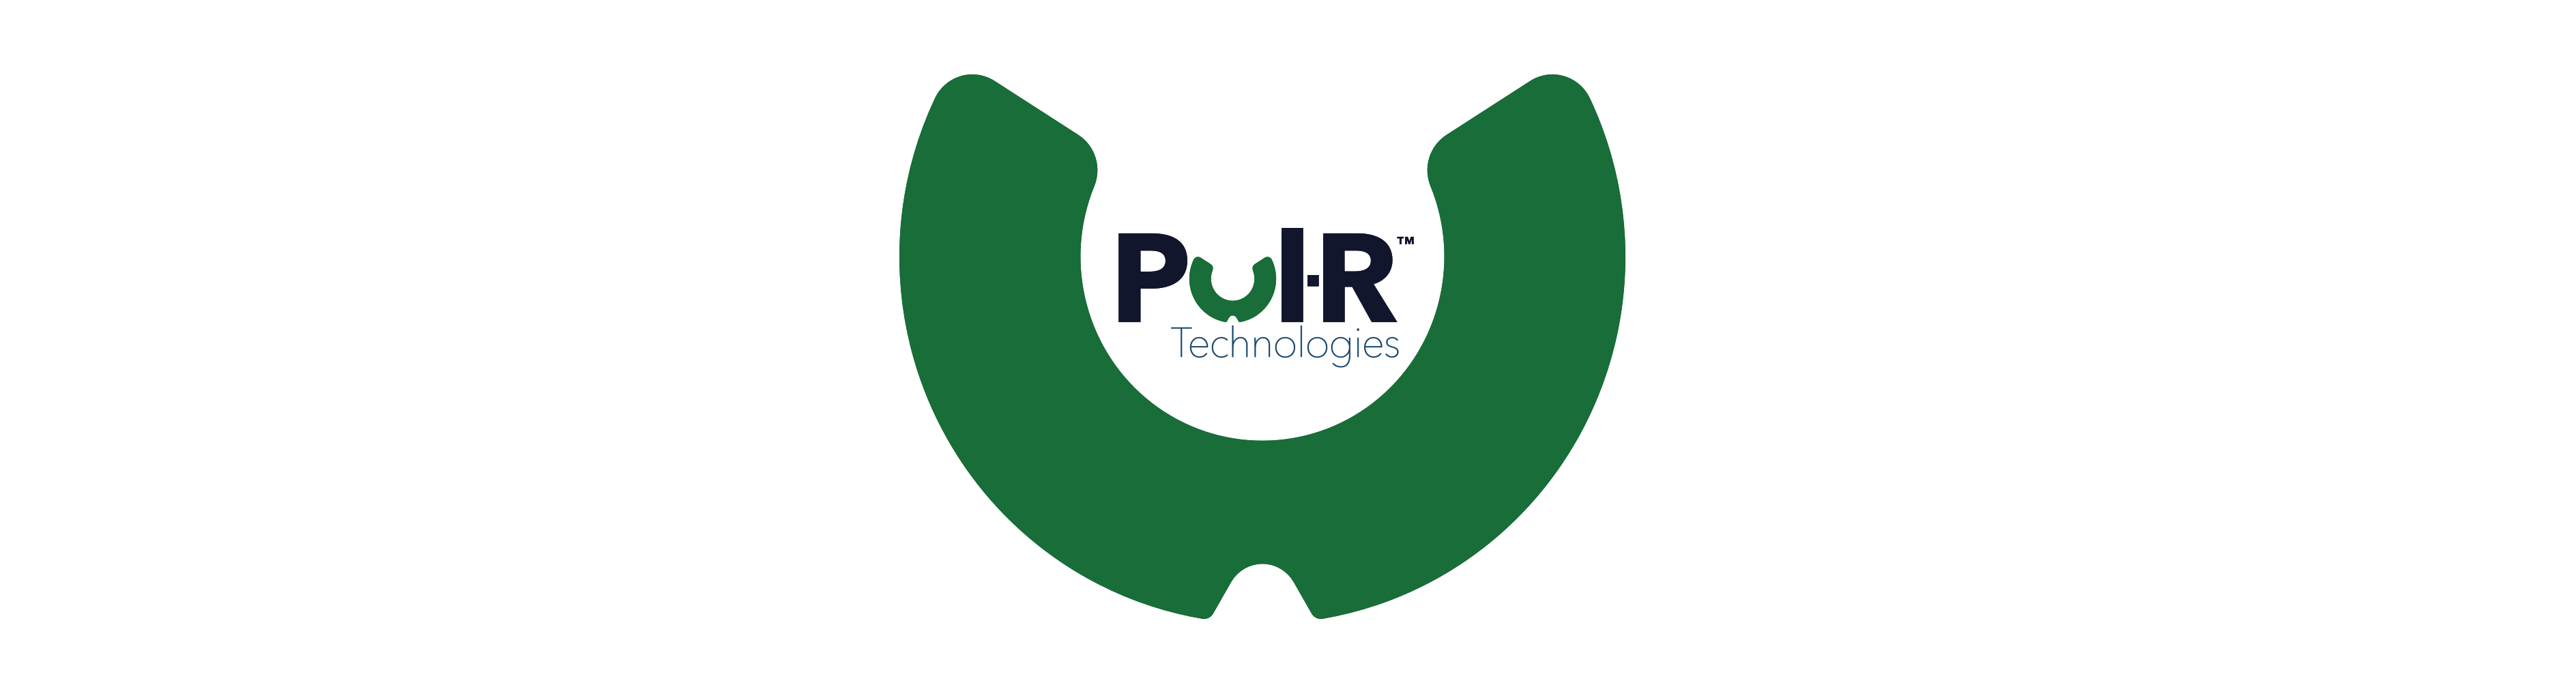 PULR Technologies has new colors